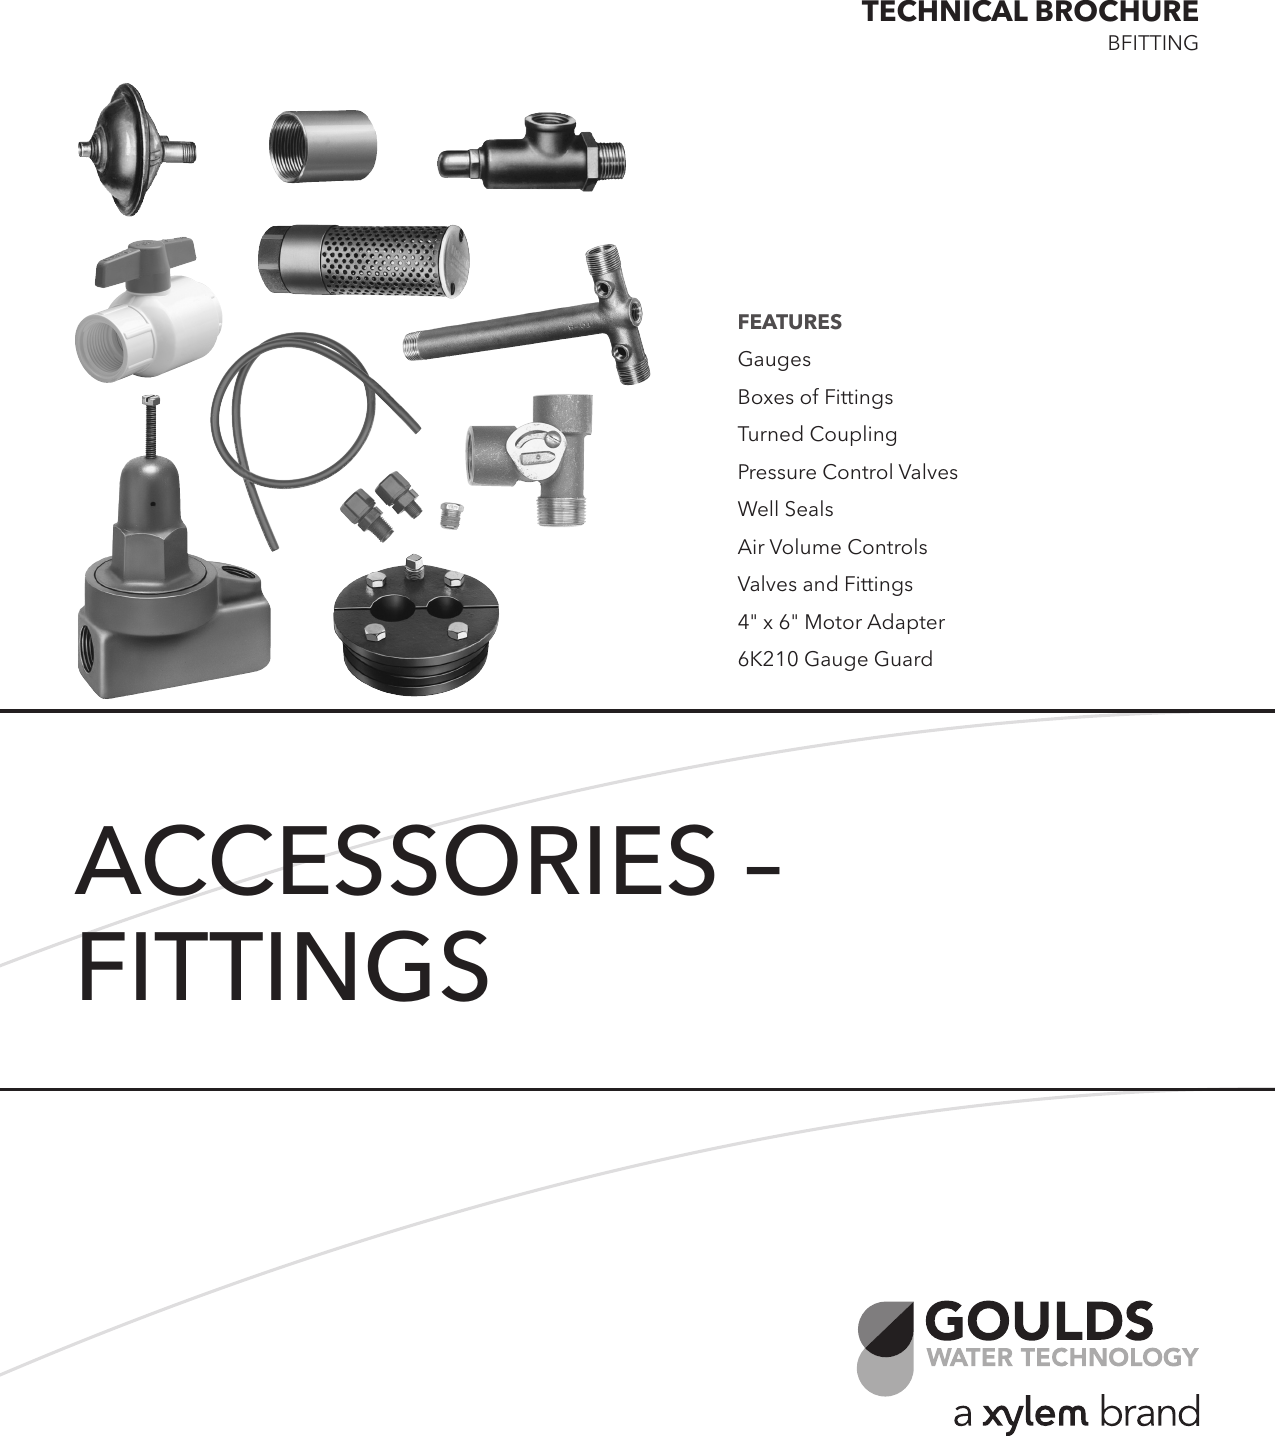 Page 1 of 4 - 538800 1 Goulds Accesories And Fittings Brochure